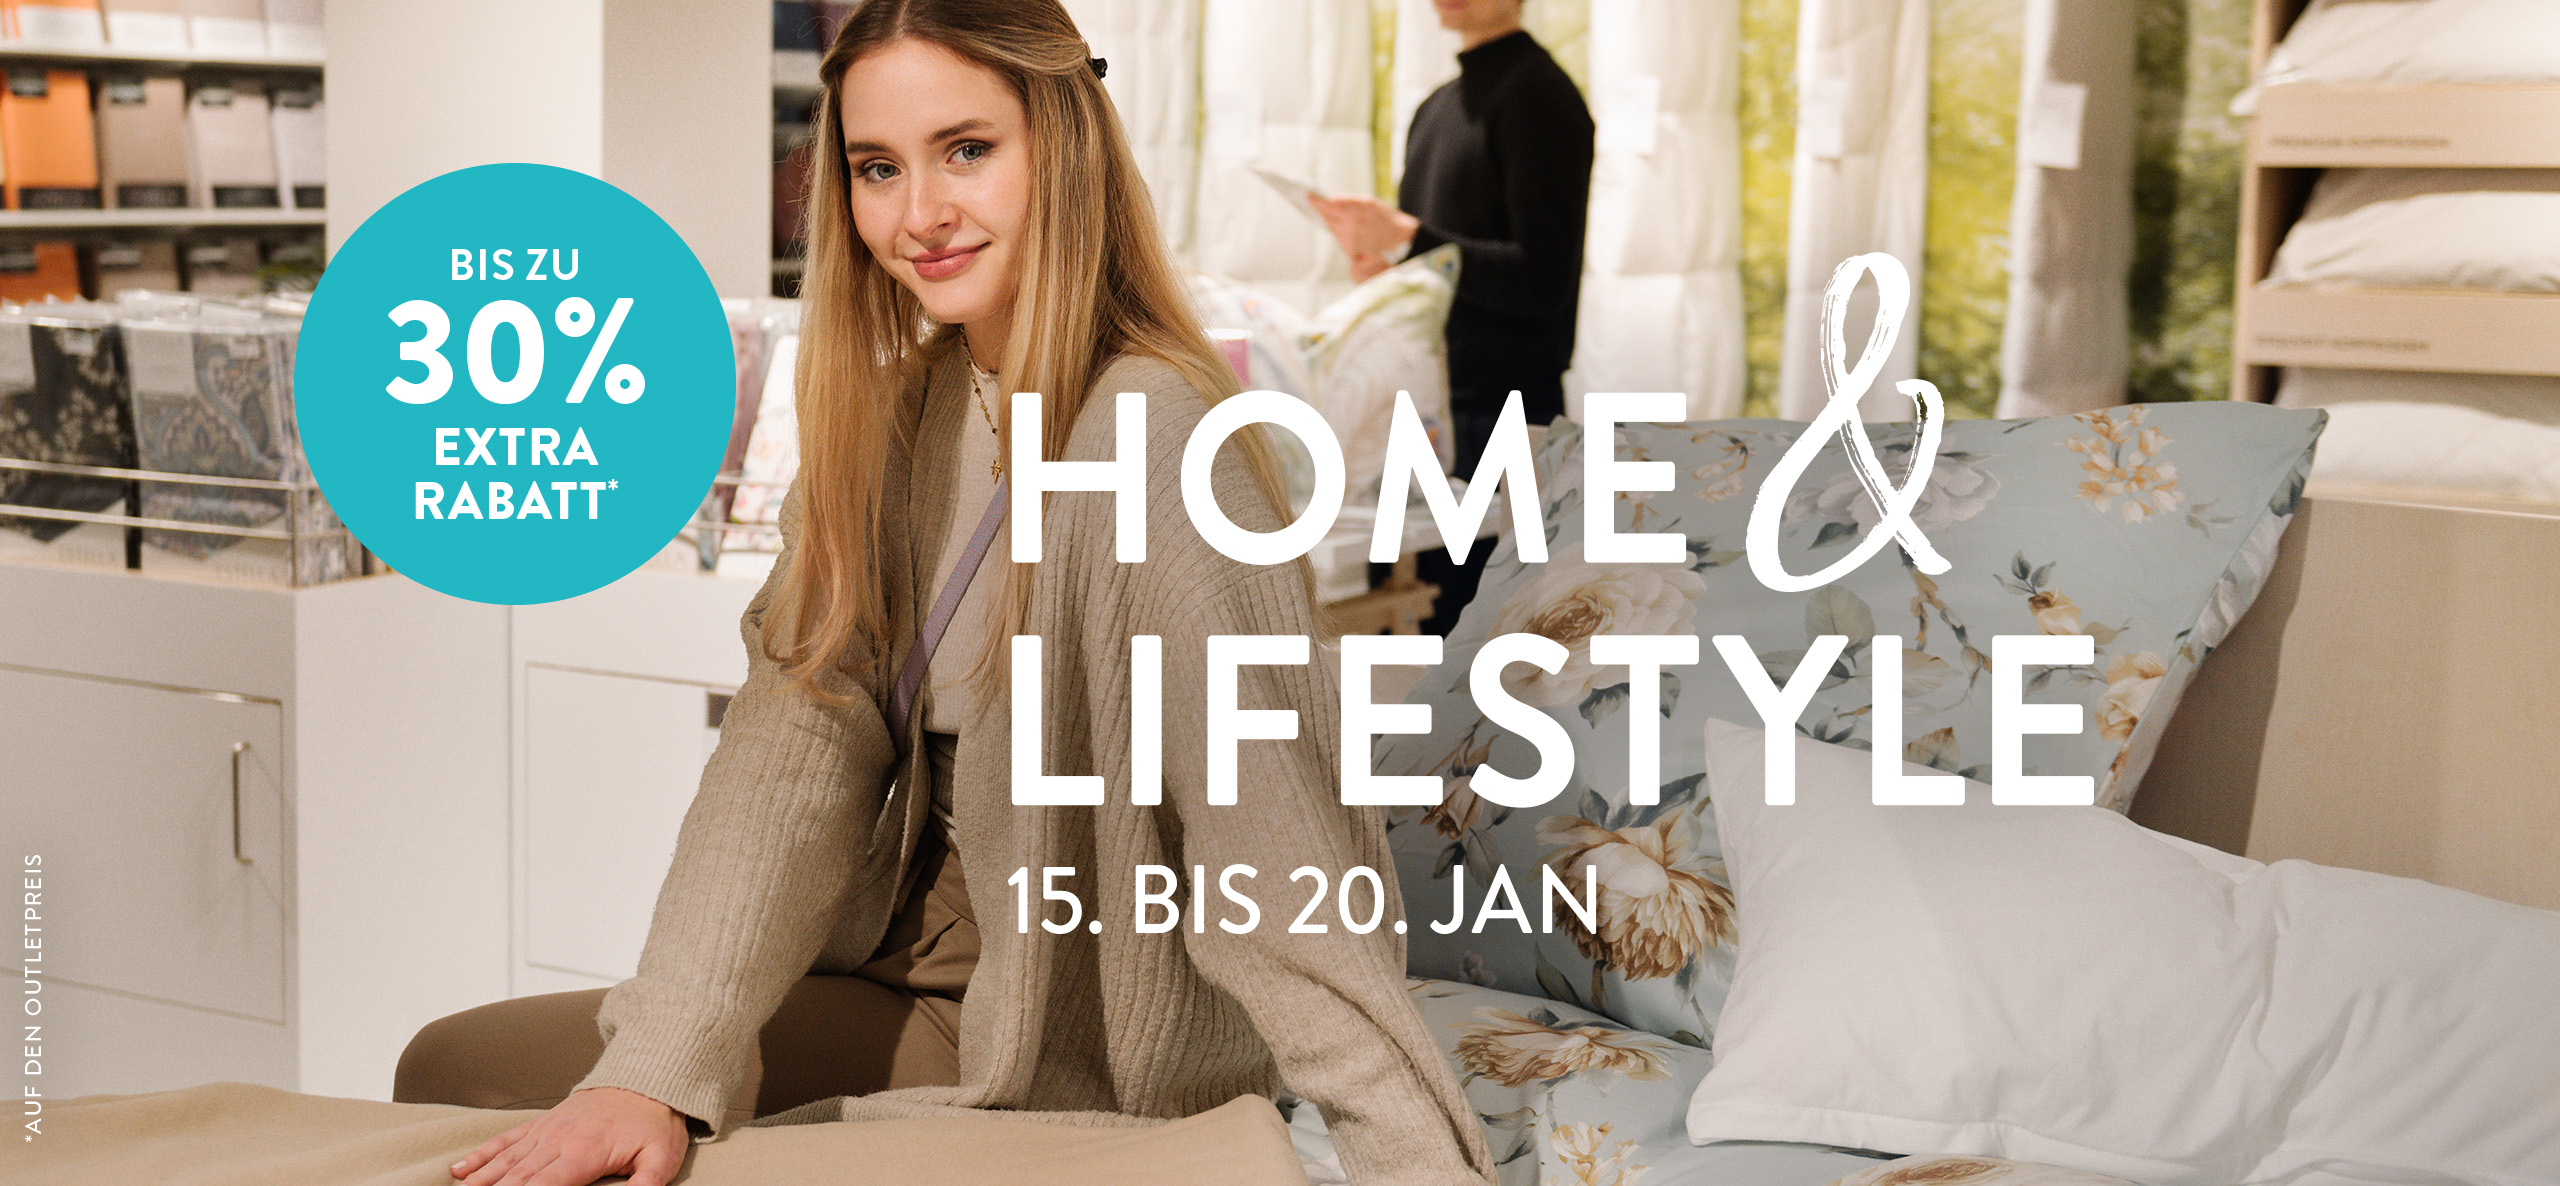 Home & Lifestyle - City Outlet Bad Münstereifel